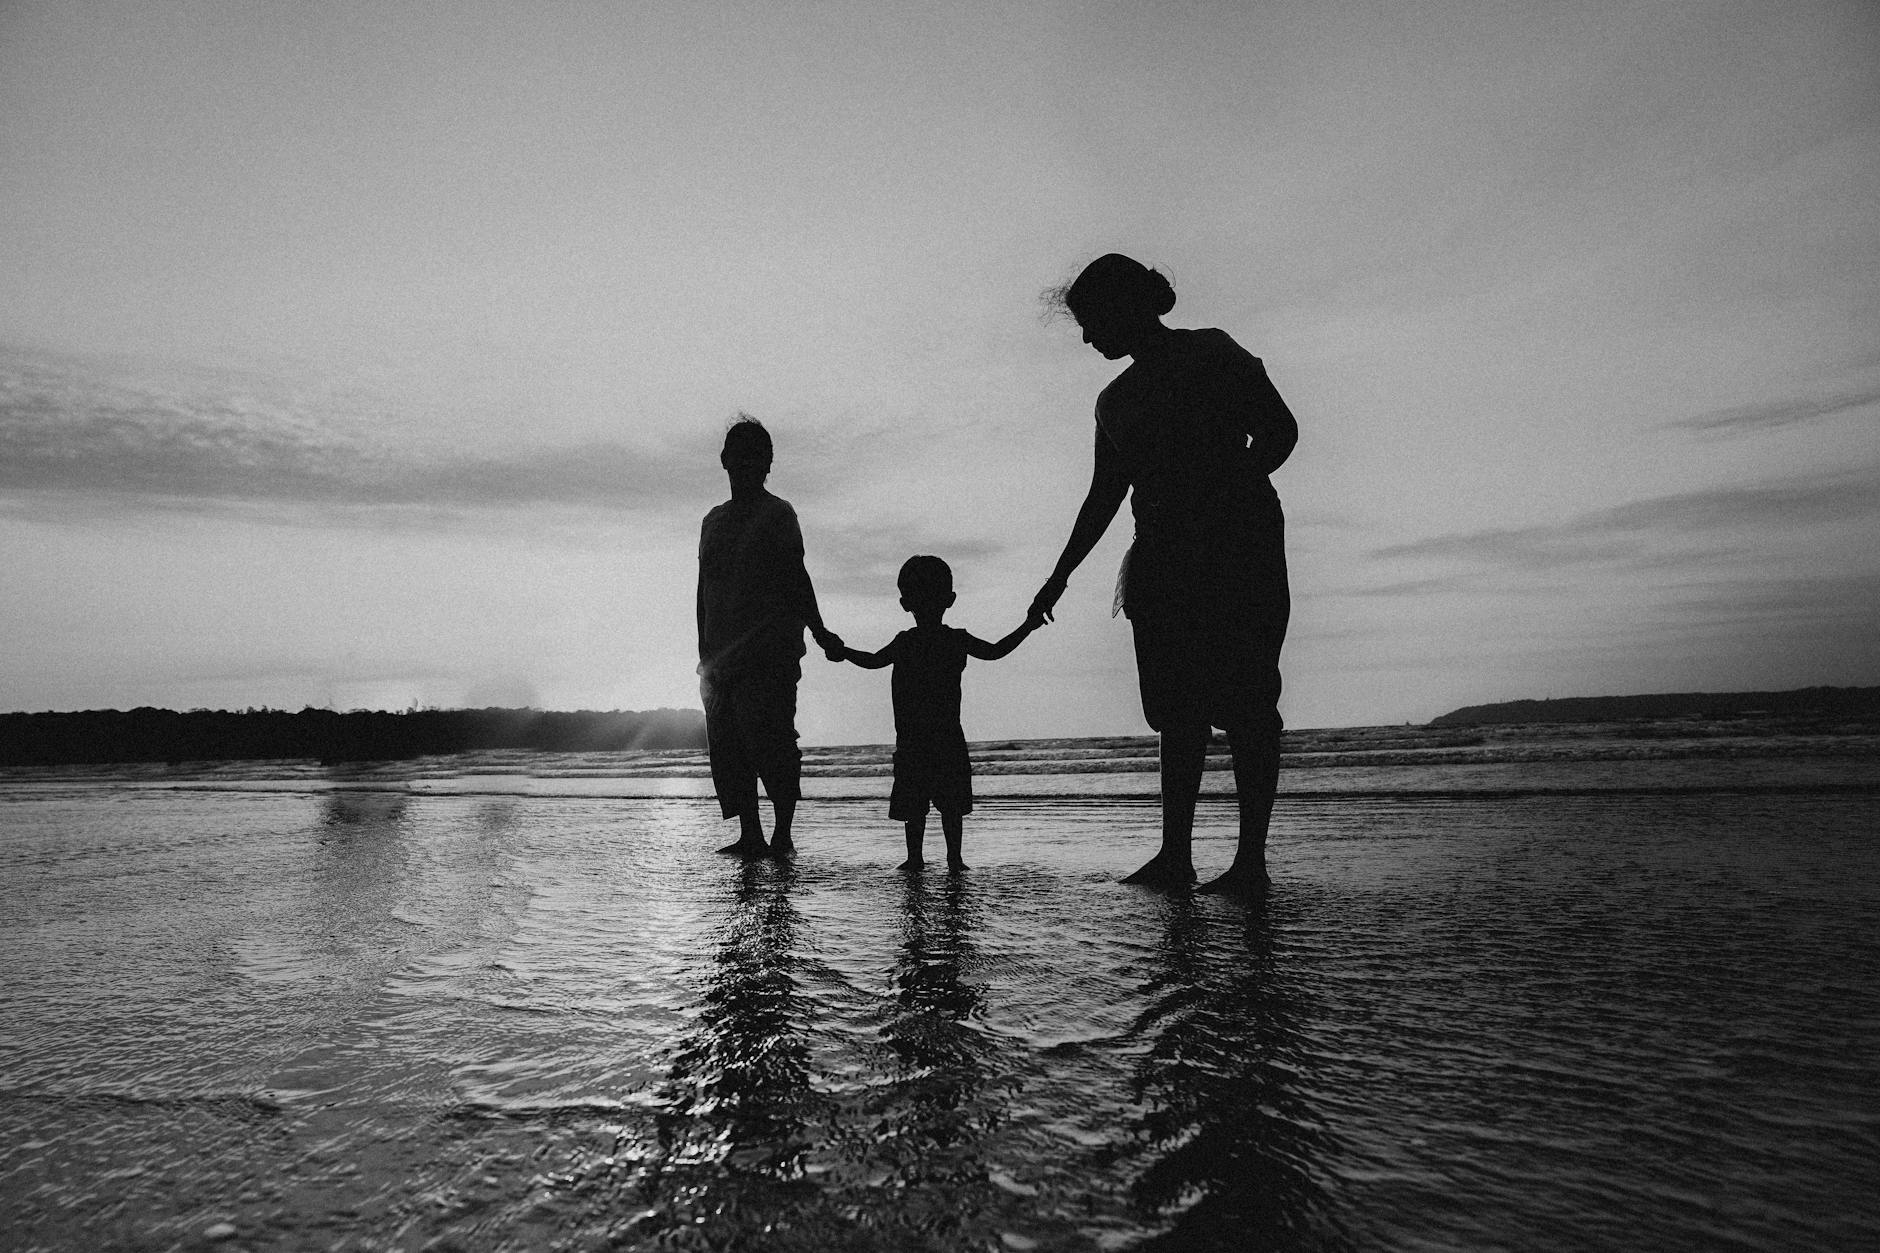 monochrome photo of people holding hands while standing on beach